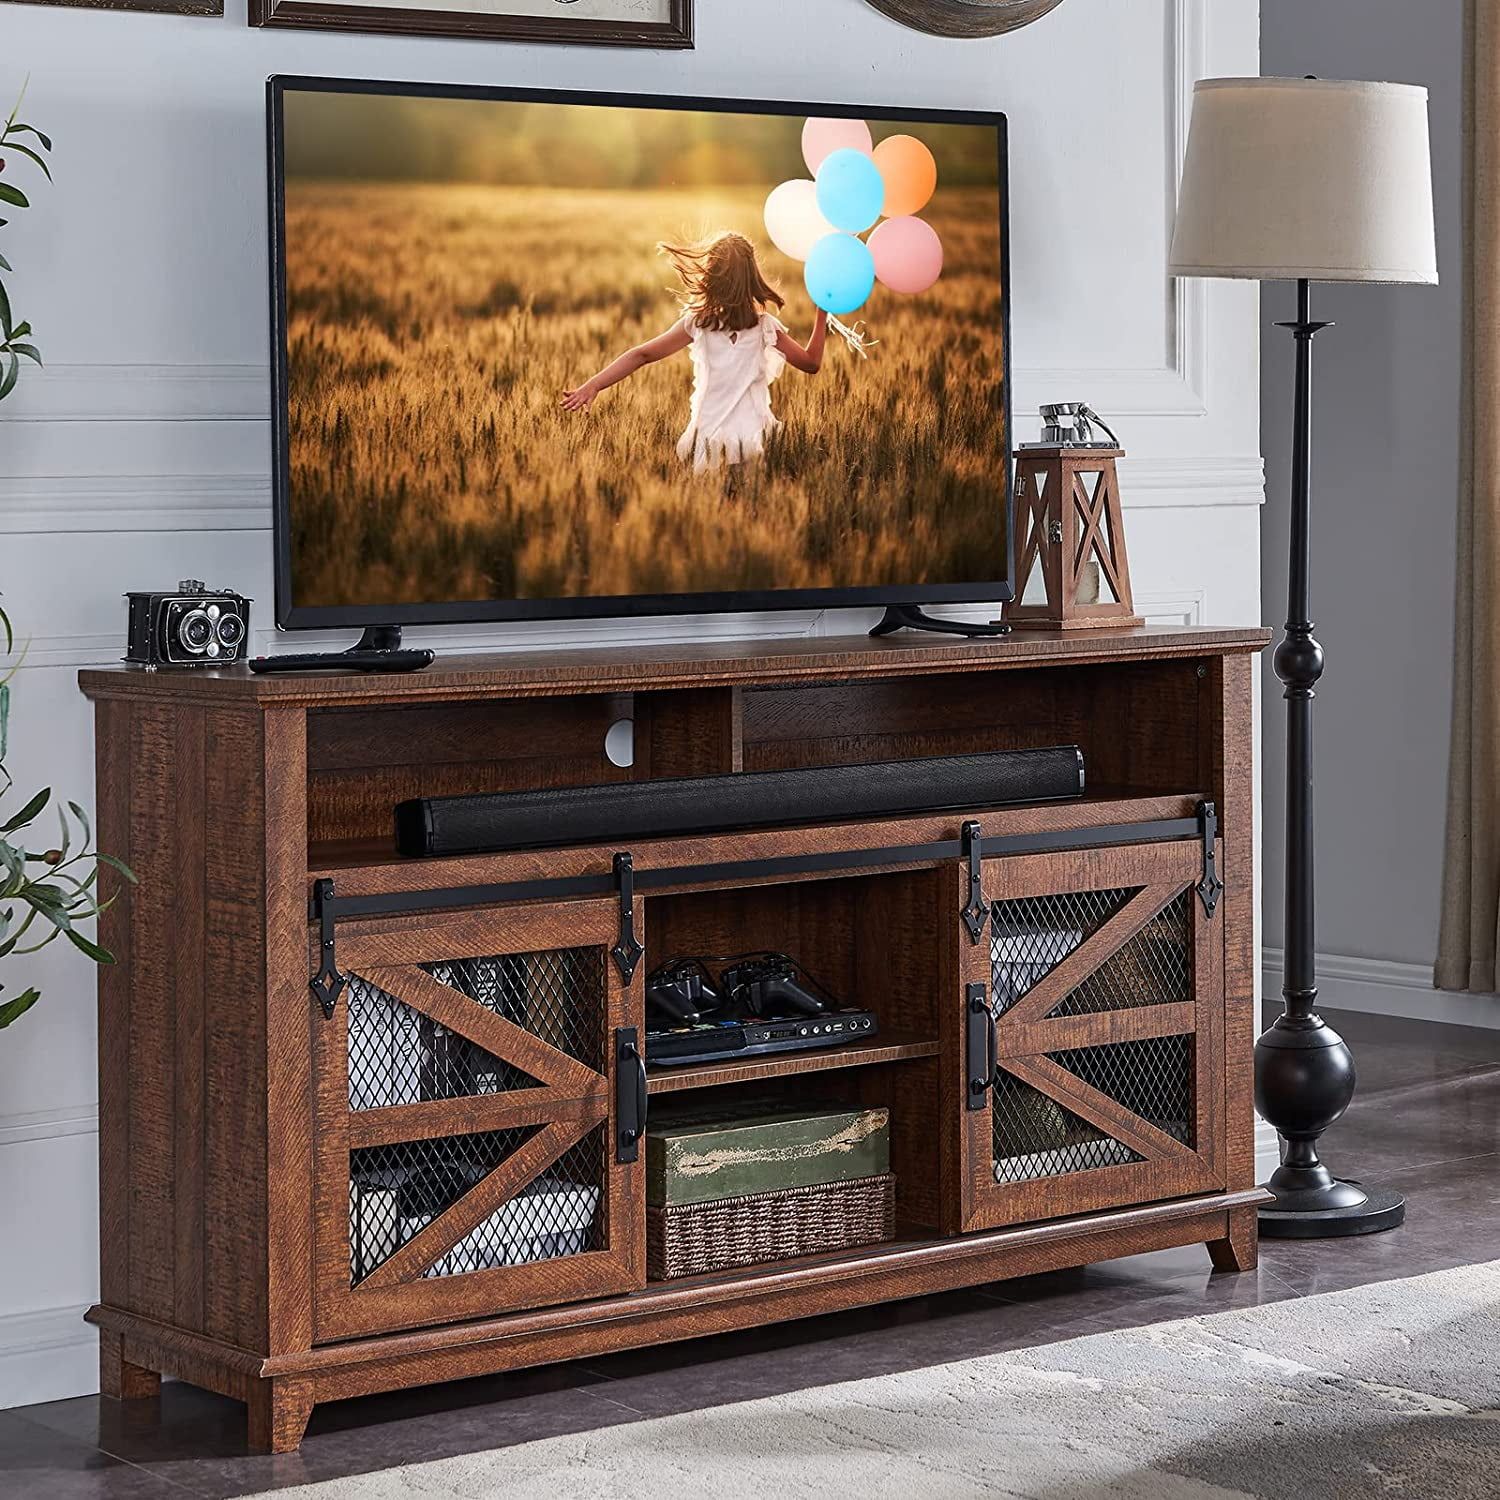 Okd Farmhouse Tv Stand For 65+ Inch Tv, Industrial Media Entertainment  Center, Reclaimed Barnwood – Walmart Inside Farmhouse Media Entertainment Centers (View 7 of 15)